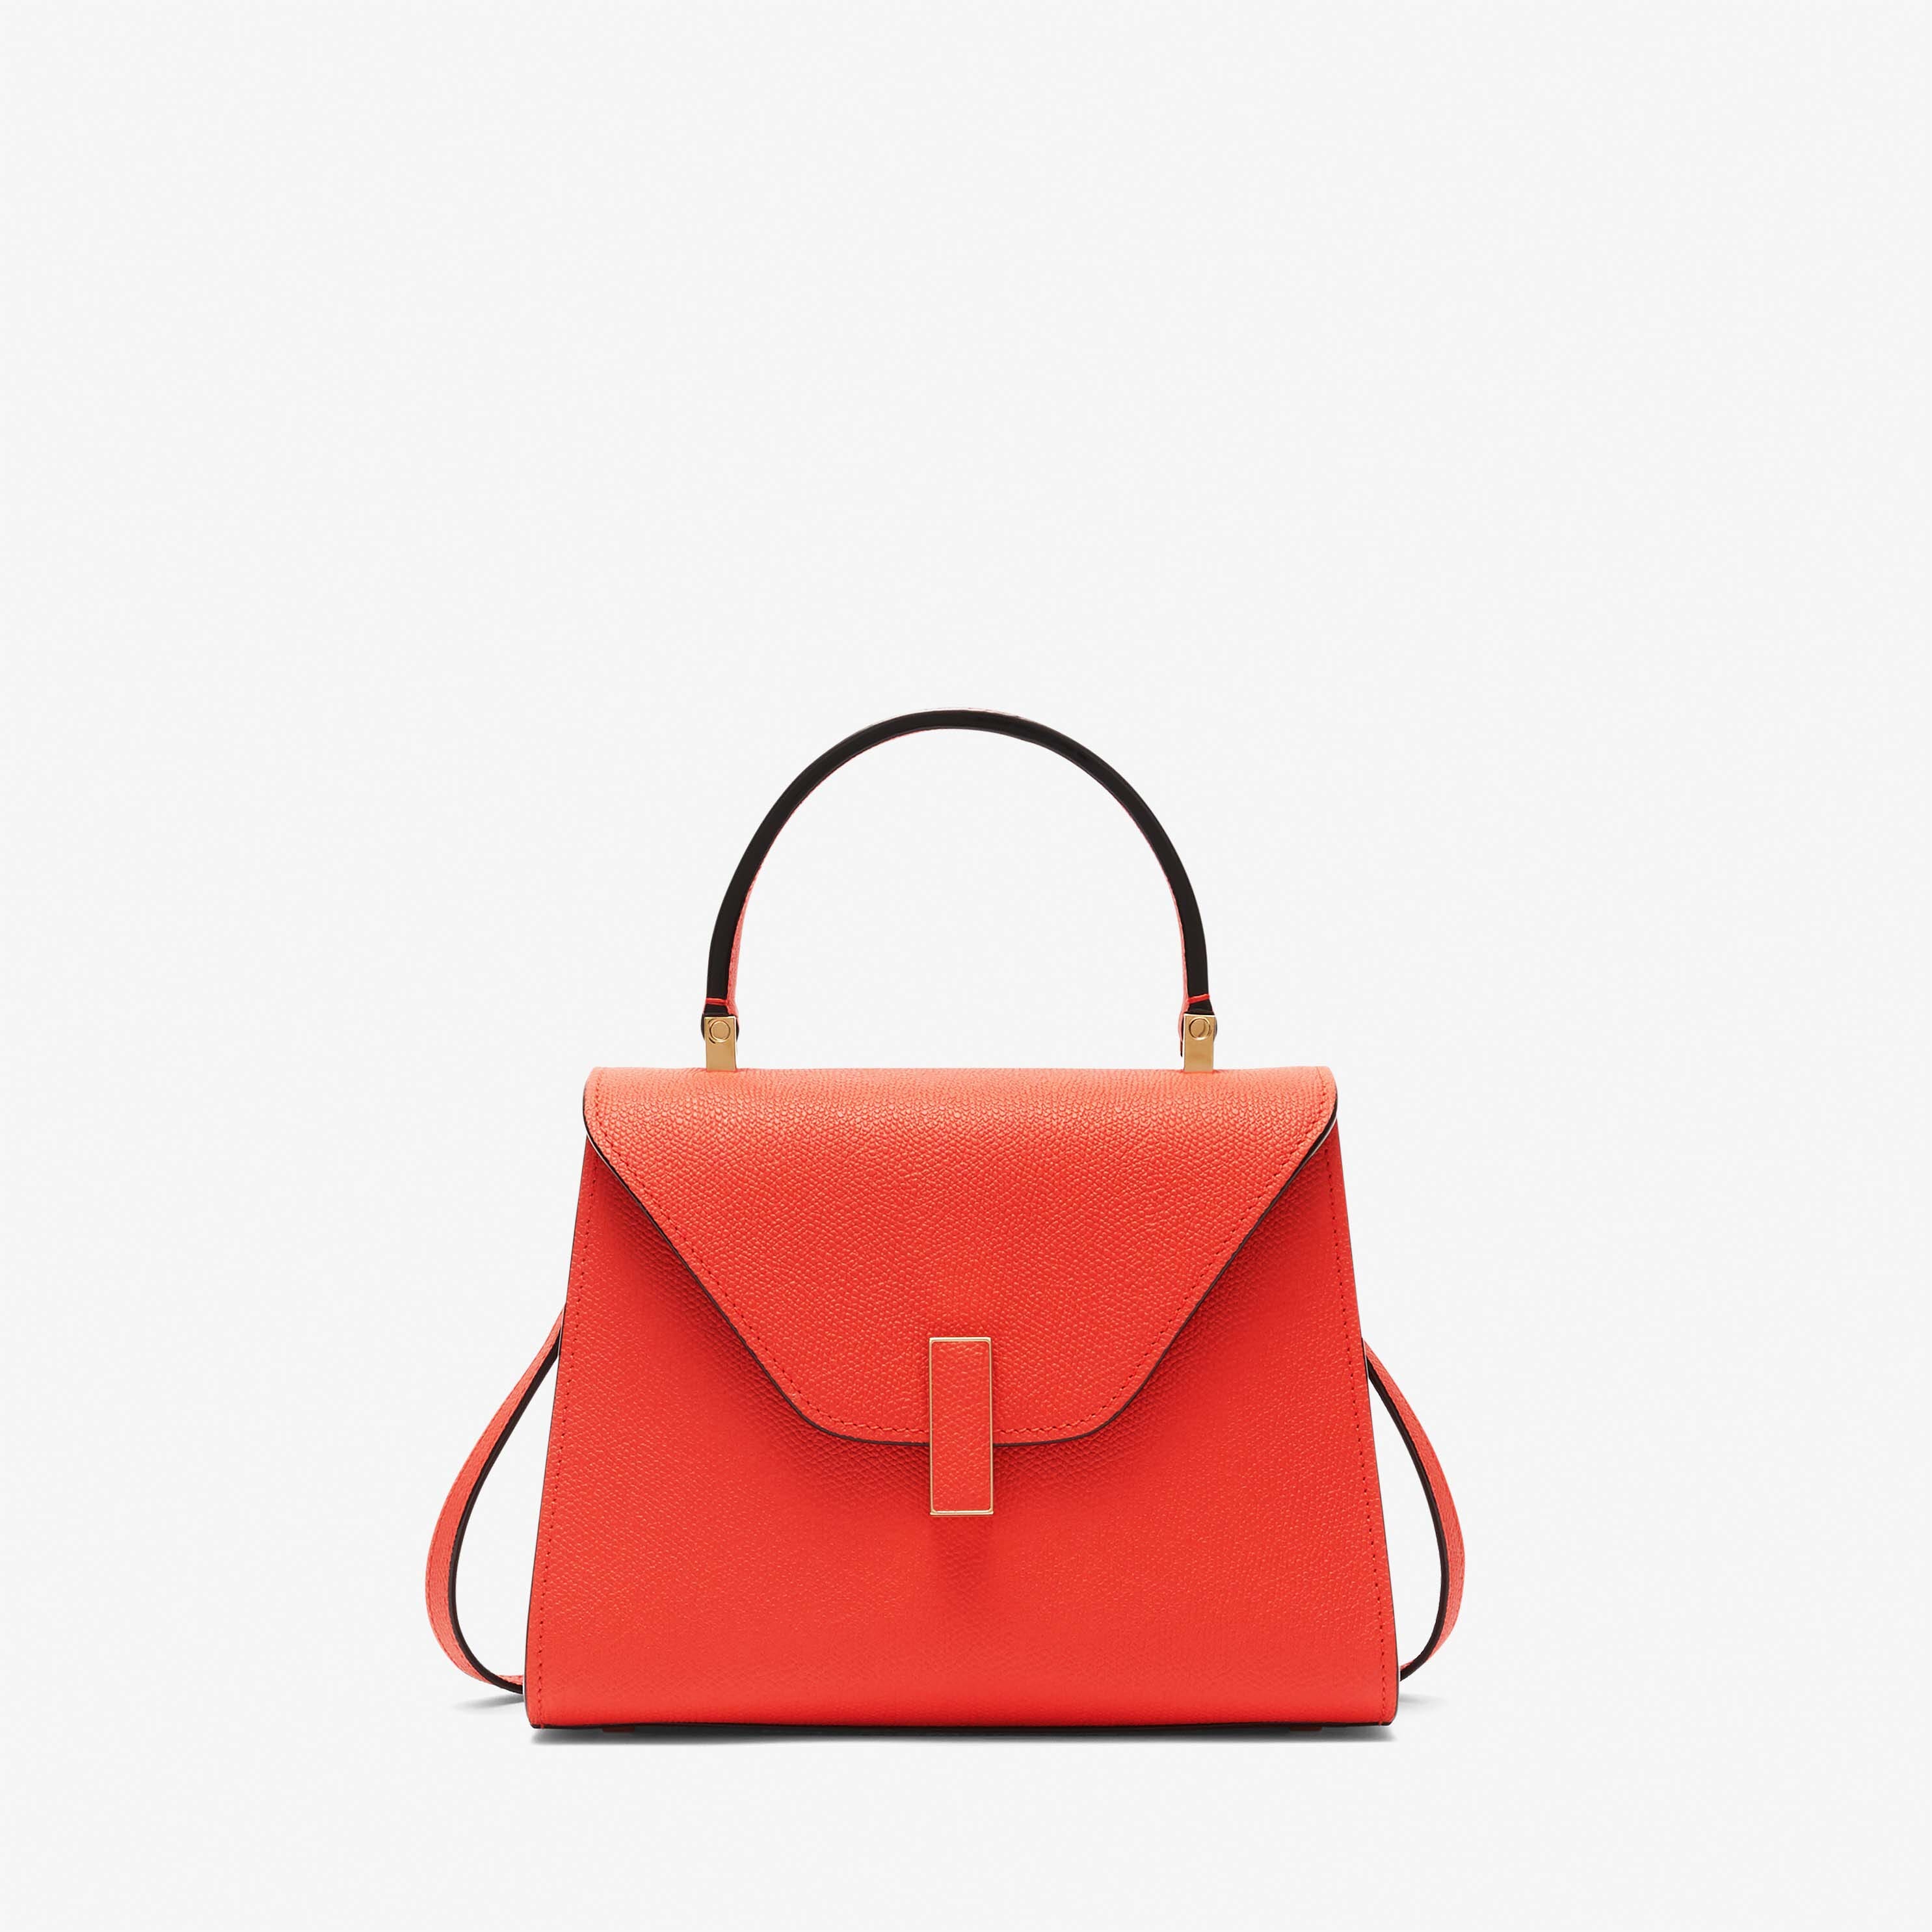 New in: Leather handbags and accessories | Valextra